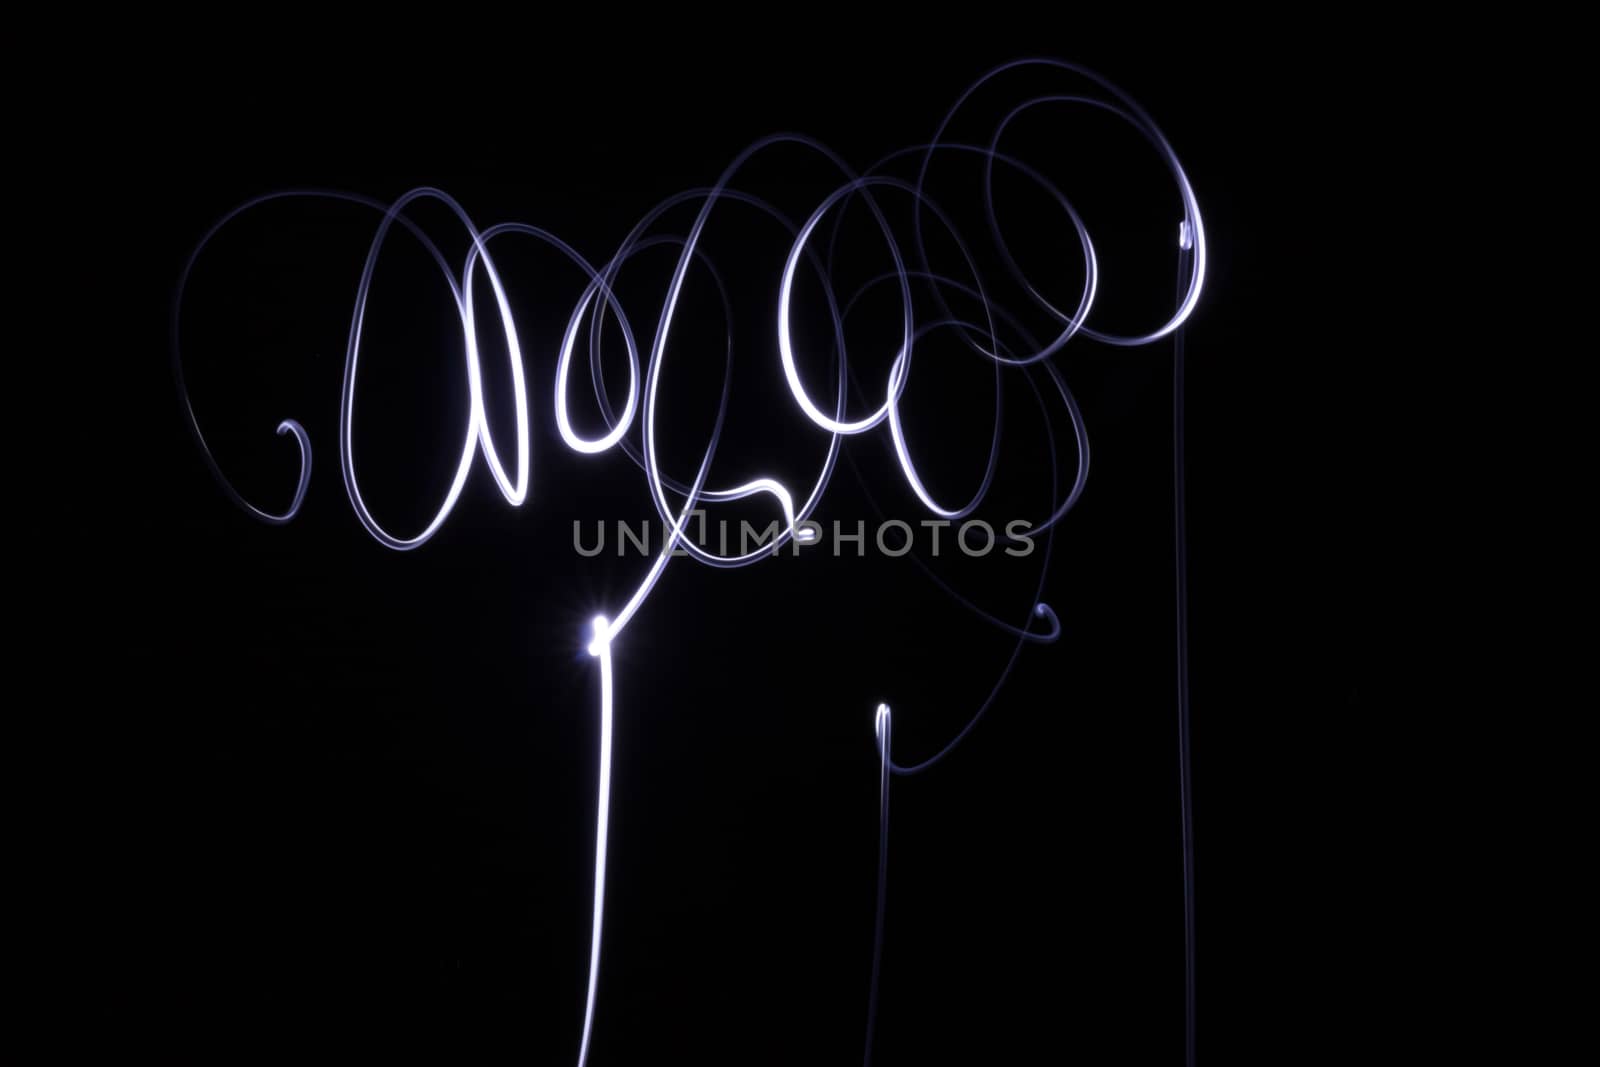 Abstract white lines on black background